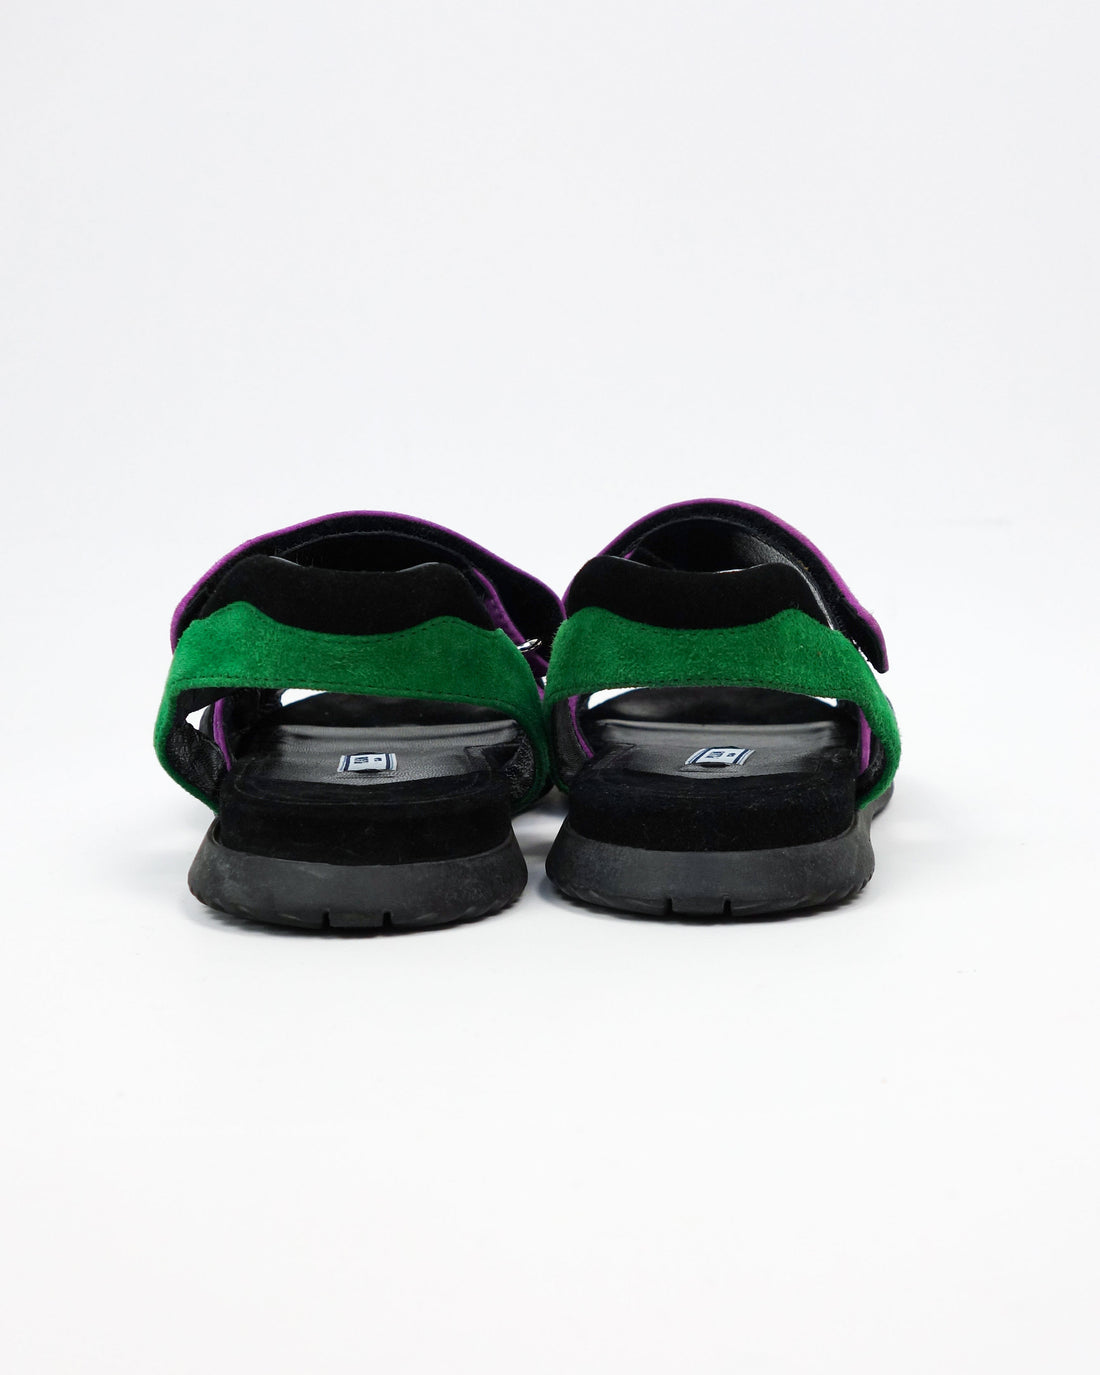 Prada Purple and Green Suede Sandals 1990's